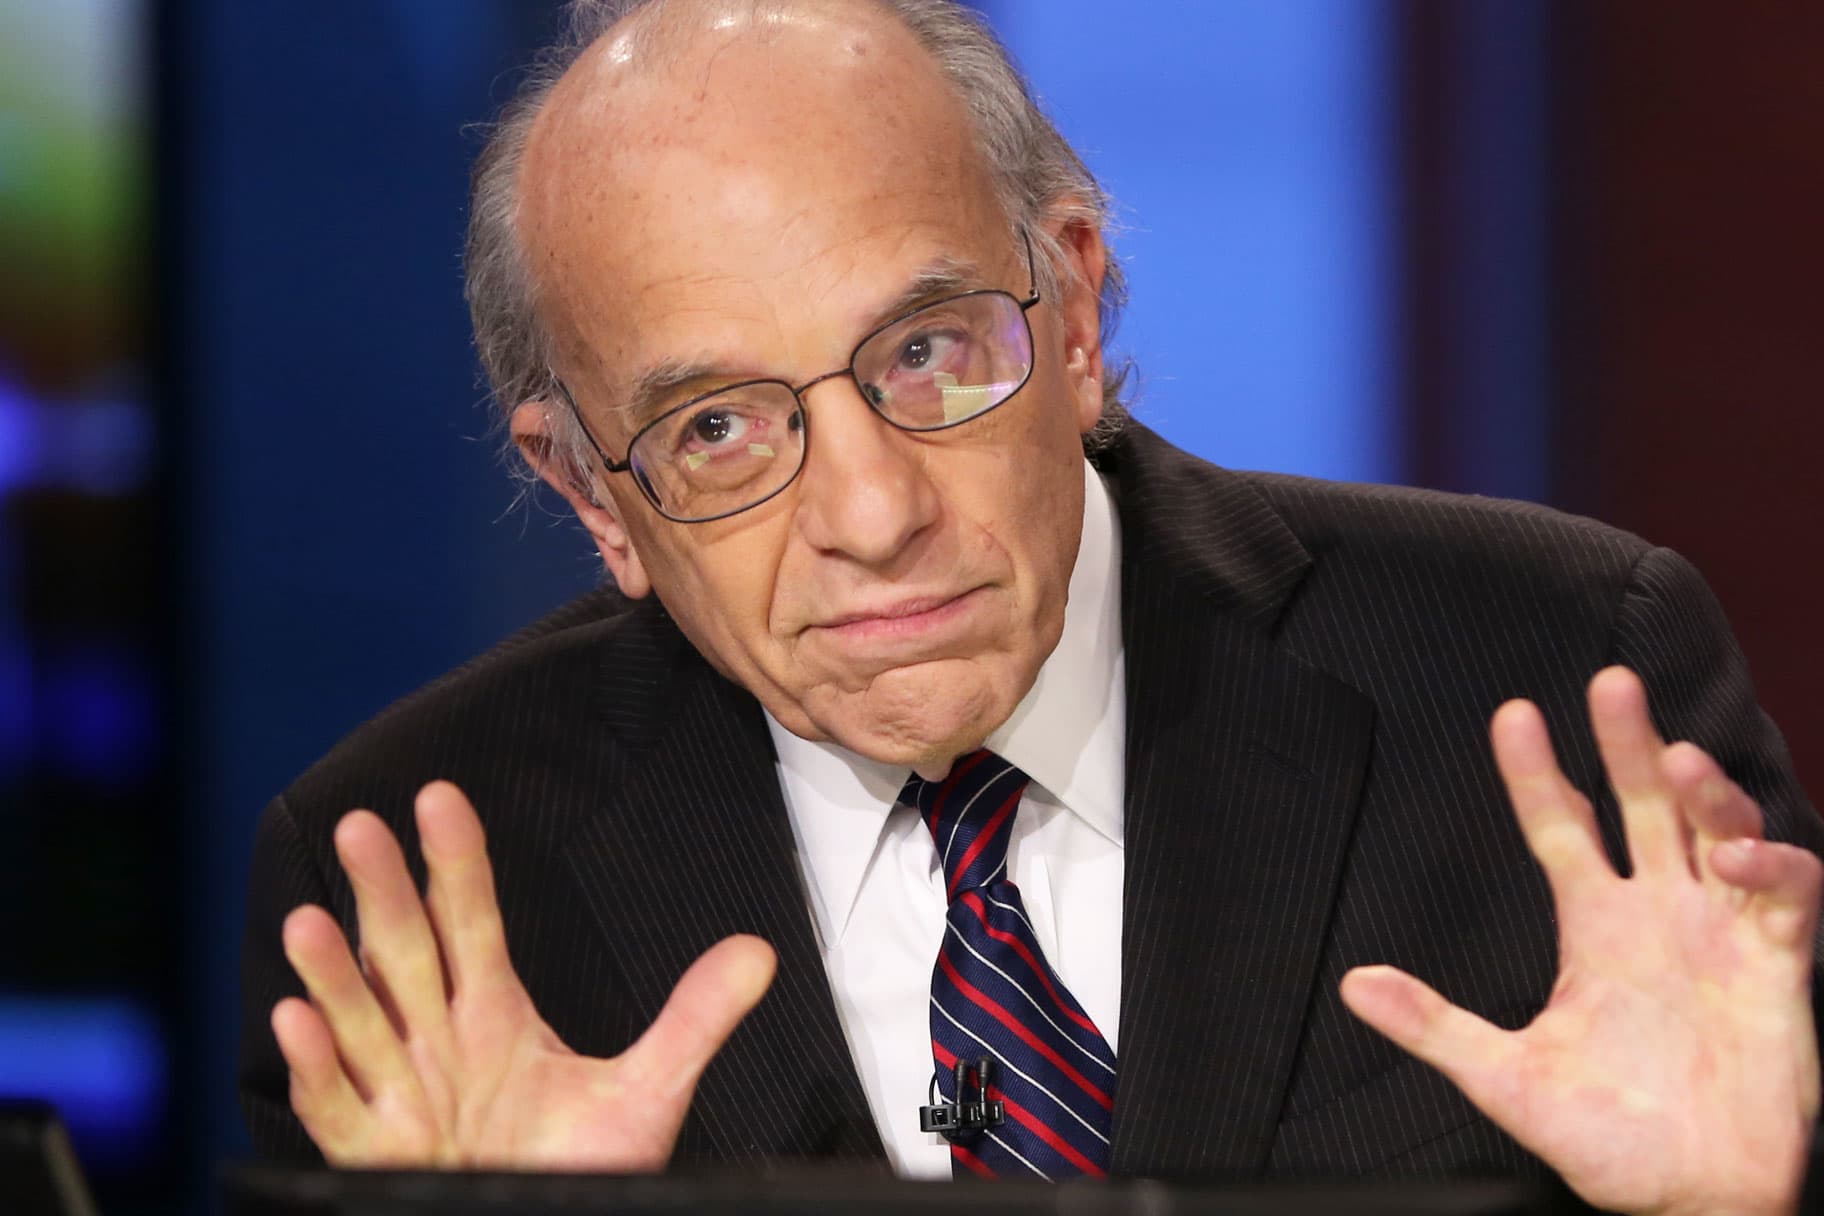 Jeremy Siegel sees stocks rallying 10%-15% in 2023 as lower rates outweigh a mild recession